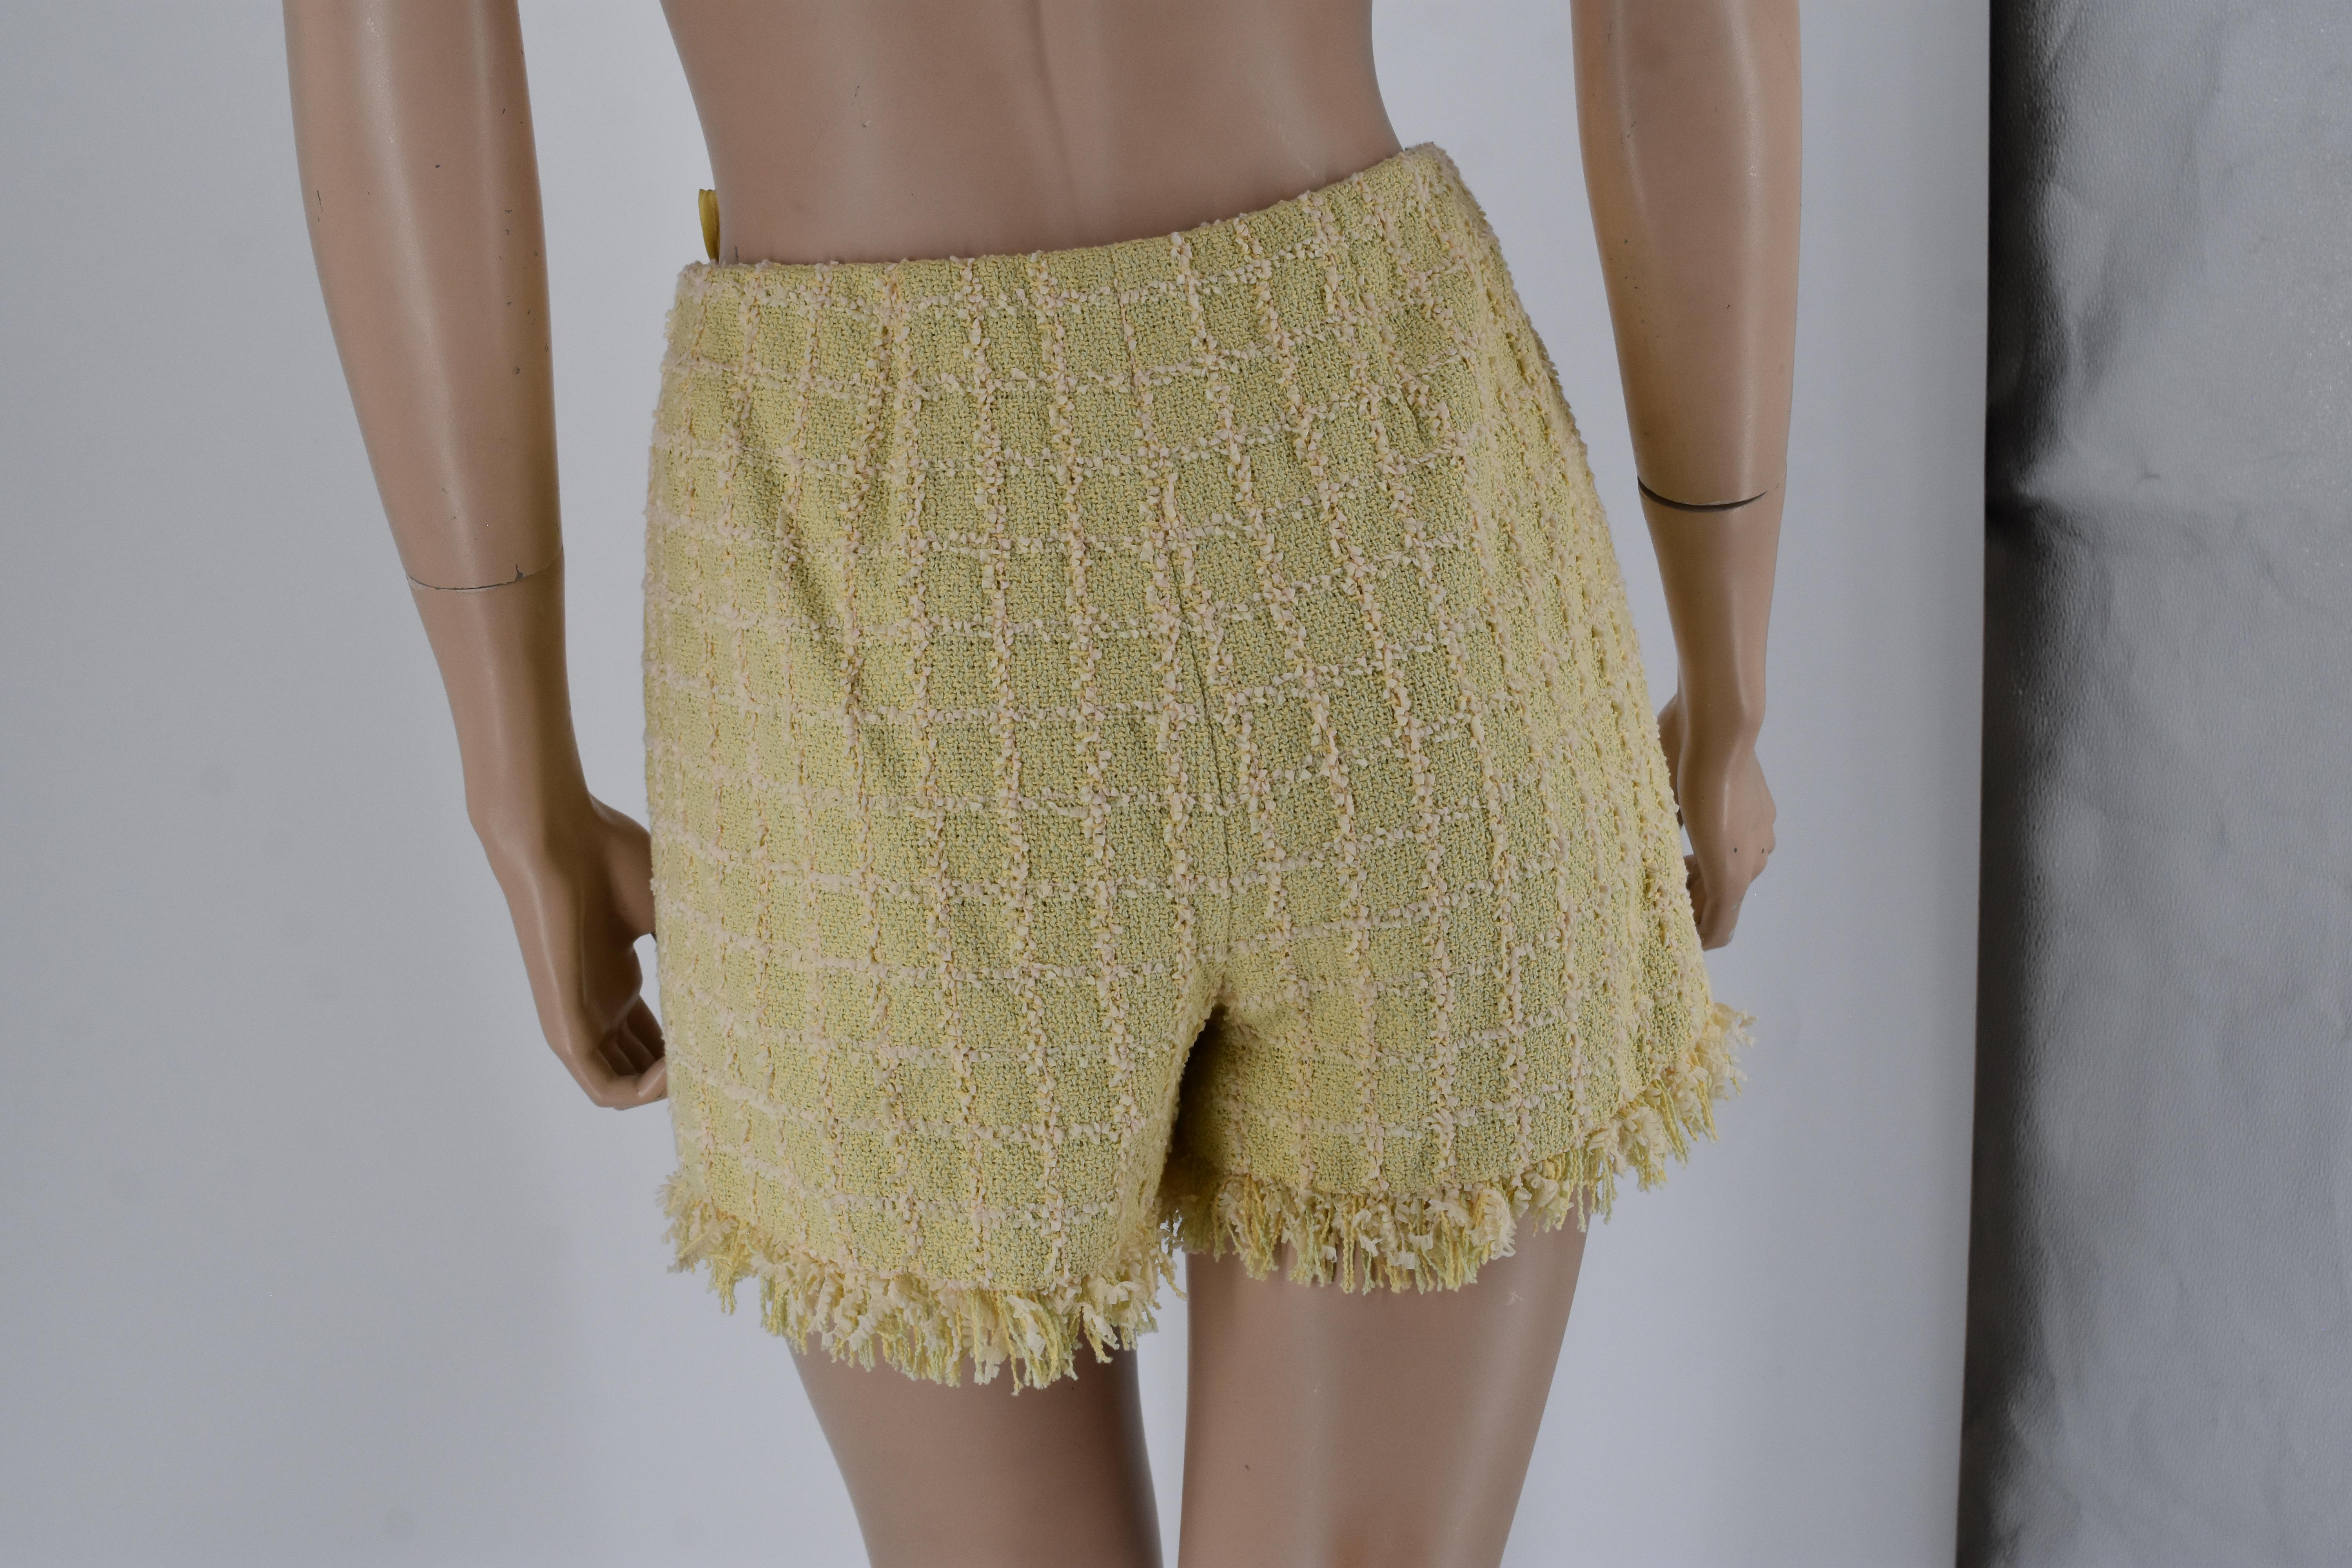 Women's Chanel NWT 94P 1994 Runway Tweed Shorts Multicolor 40 and Fabric Swatch For Sale